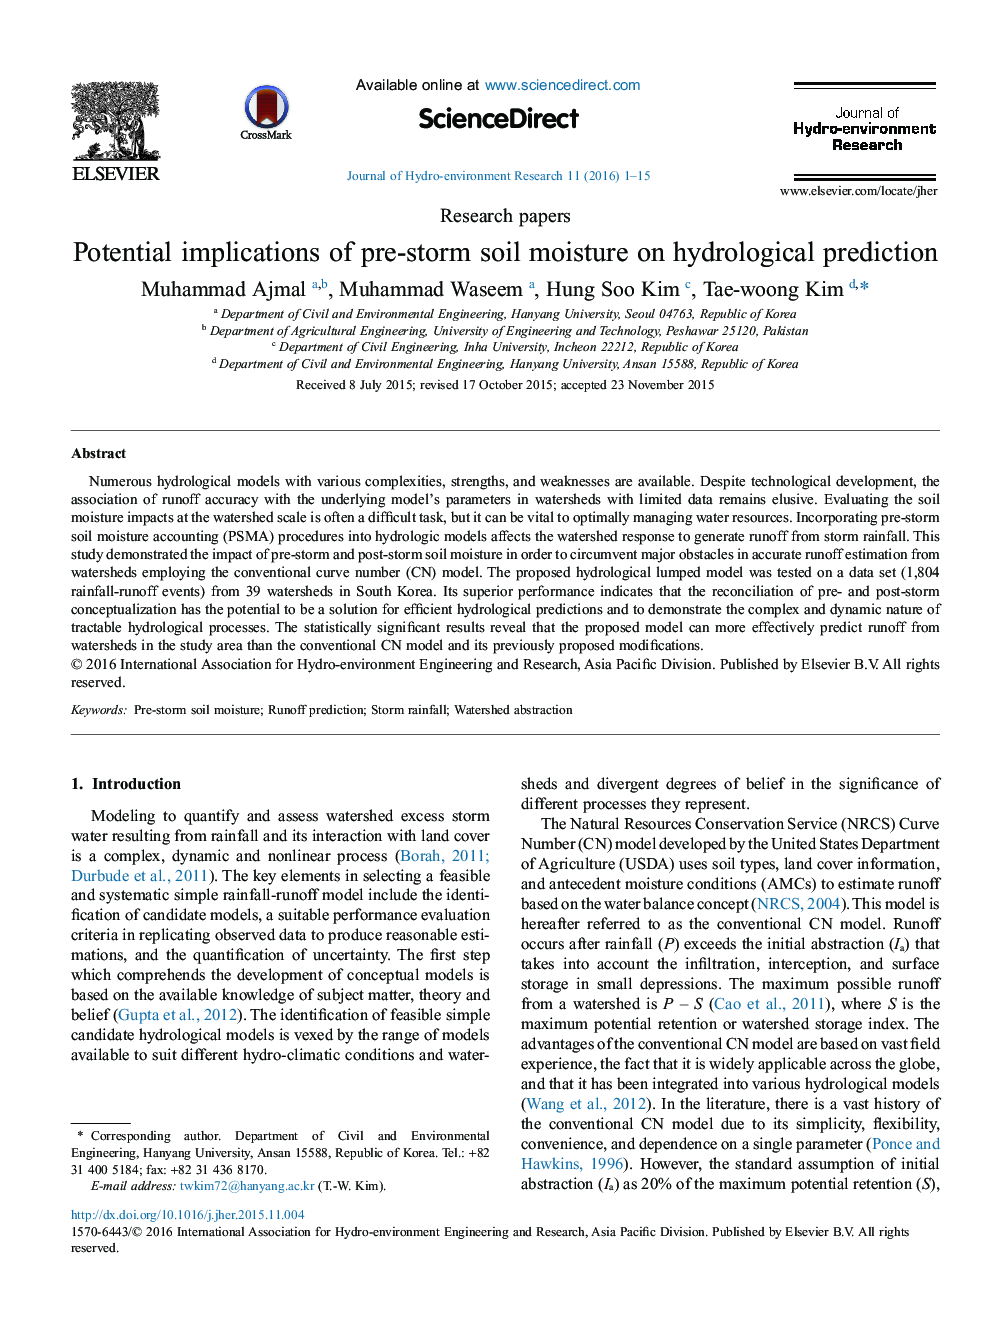 Potential implications of pre-storm soil moisture on hydrological prediction